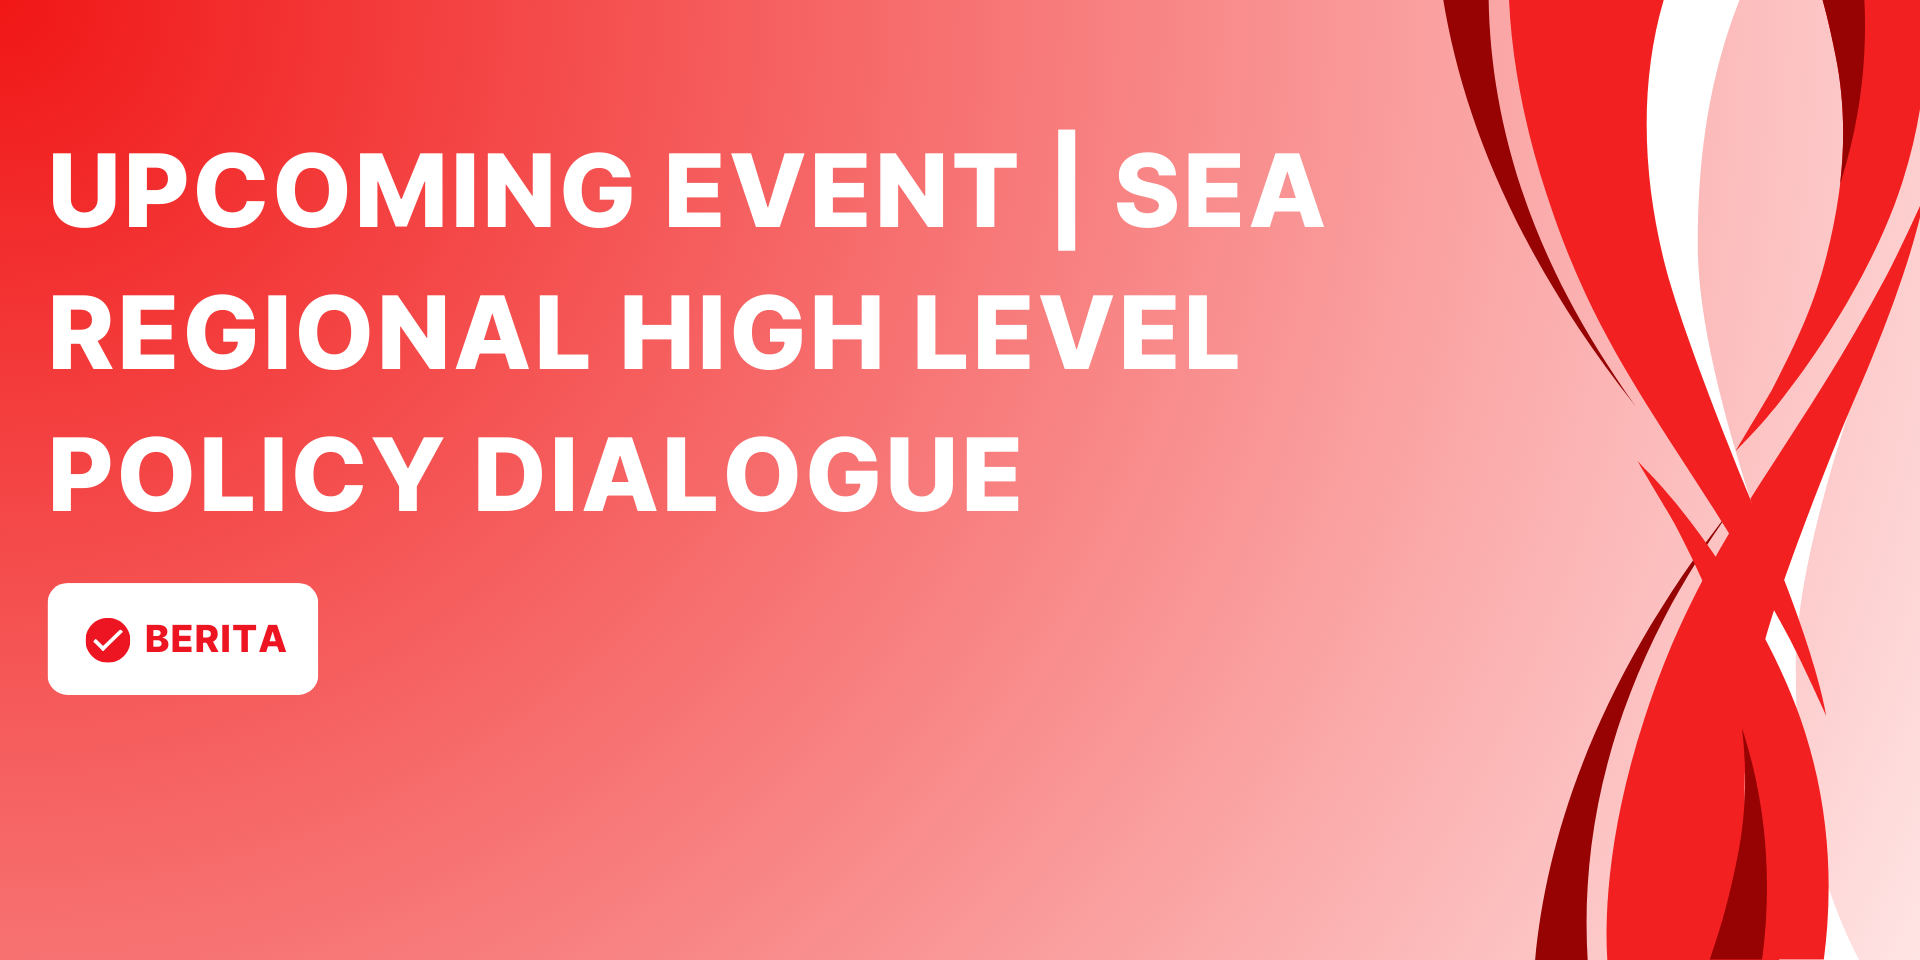 Upcoming Event | SEA Regional High Level Policy Dialogue